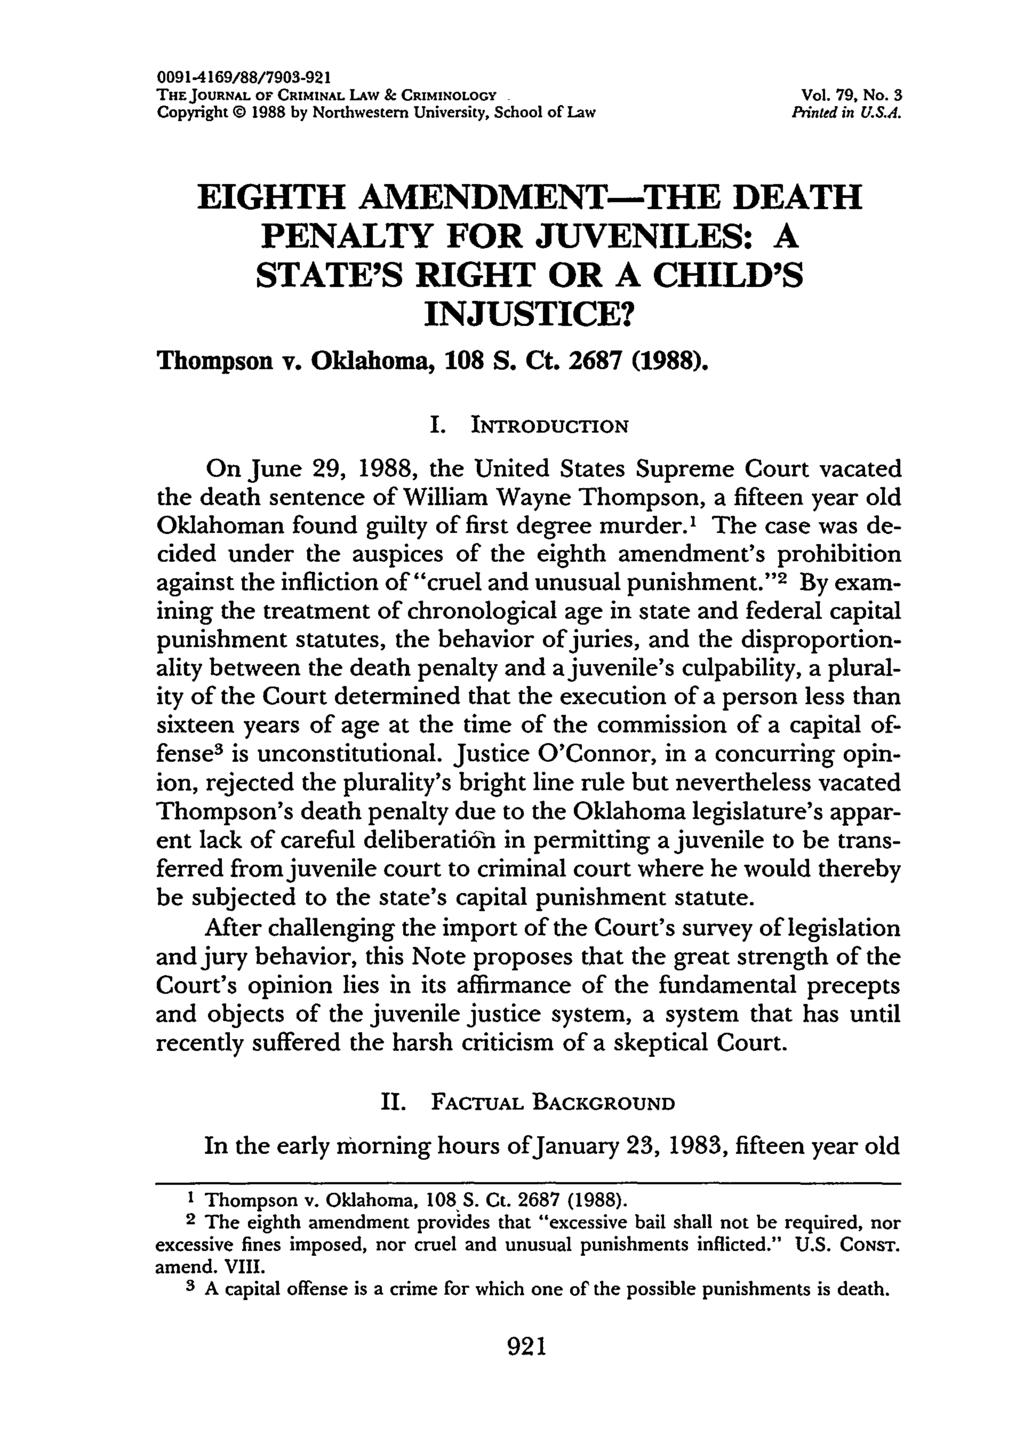 0091-4169/88/7903-921 THEJOURNAL OF CRIMINAL LAW & CRIMINOLOGY Vol. 79, No. 3 Copyright 0 1988 by Northwestern University, School of Law Pinted in U.S.A. EIGHTH AMENDMENT-THE DEATH PENALTY FOR JUVENILES: A STATE'S RIGHT OR A CHILD'S INJUSTICE?